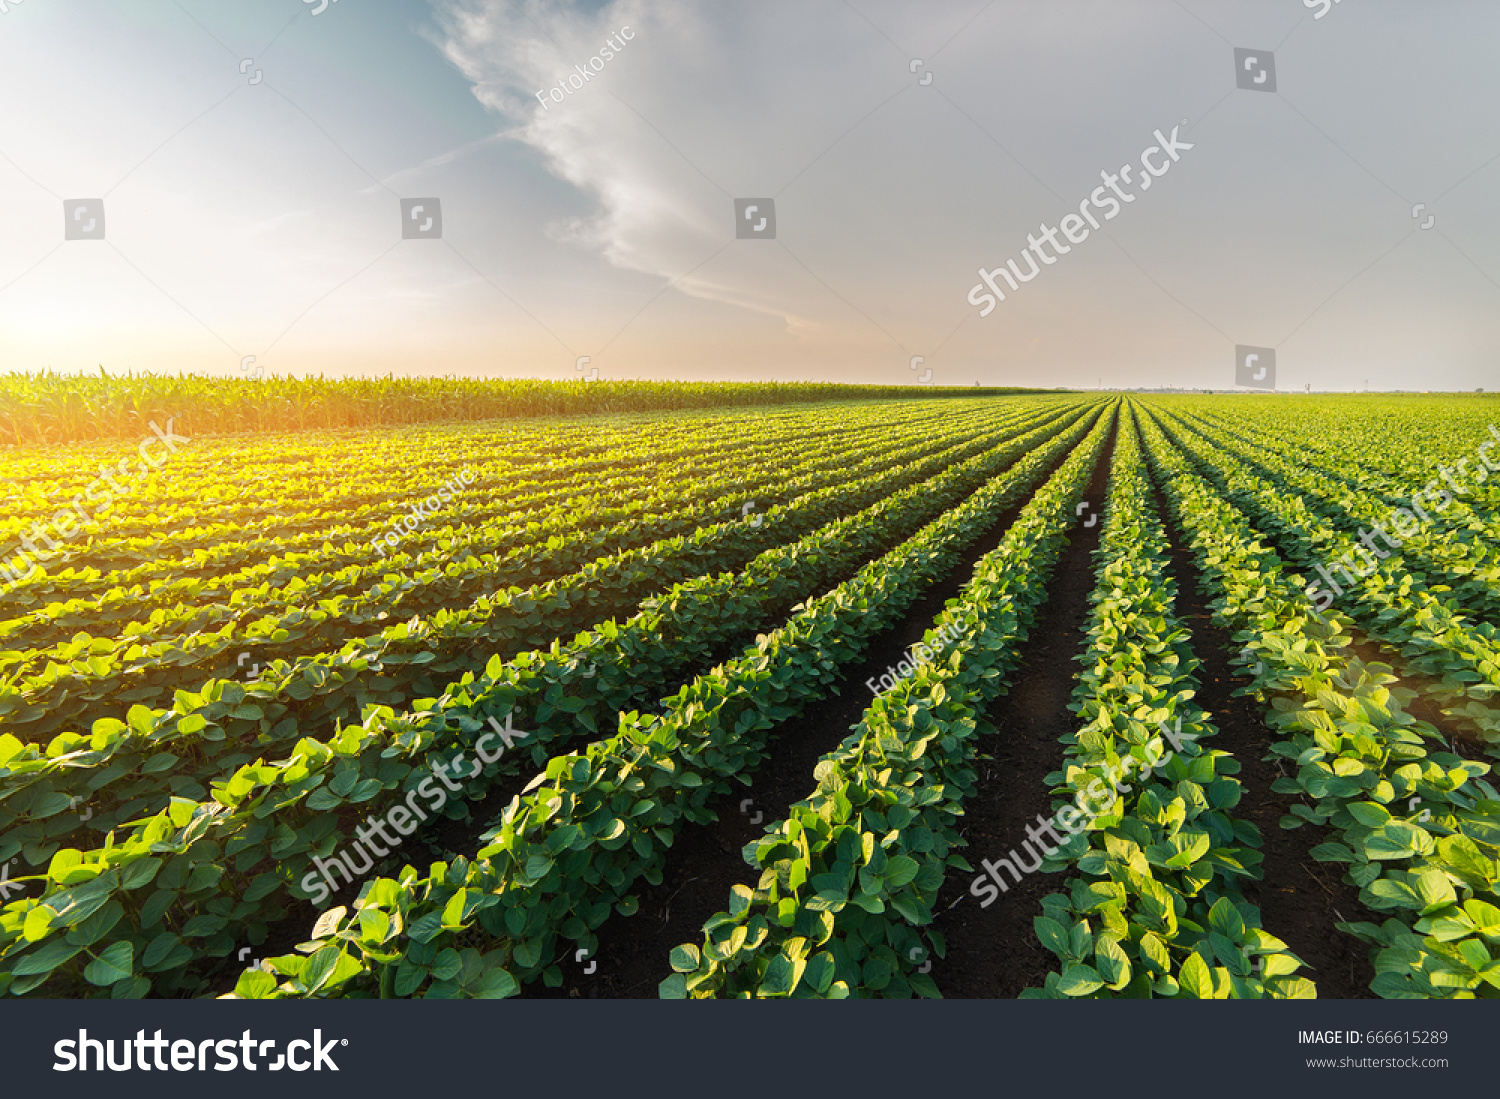  Agricultural soy plantation on sunny day - Green growing soybeans plant against sunlight  #666615289